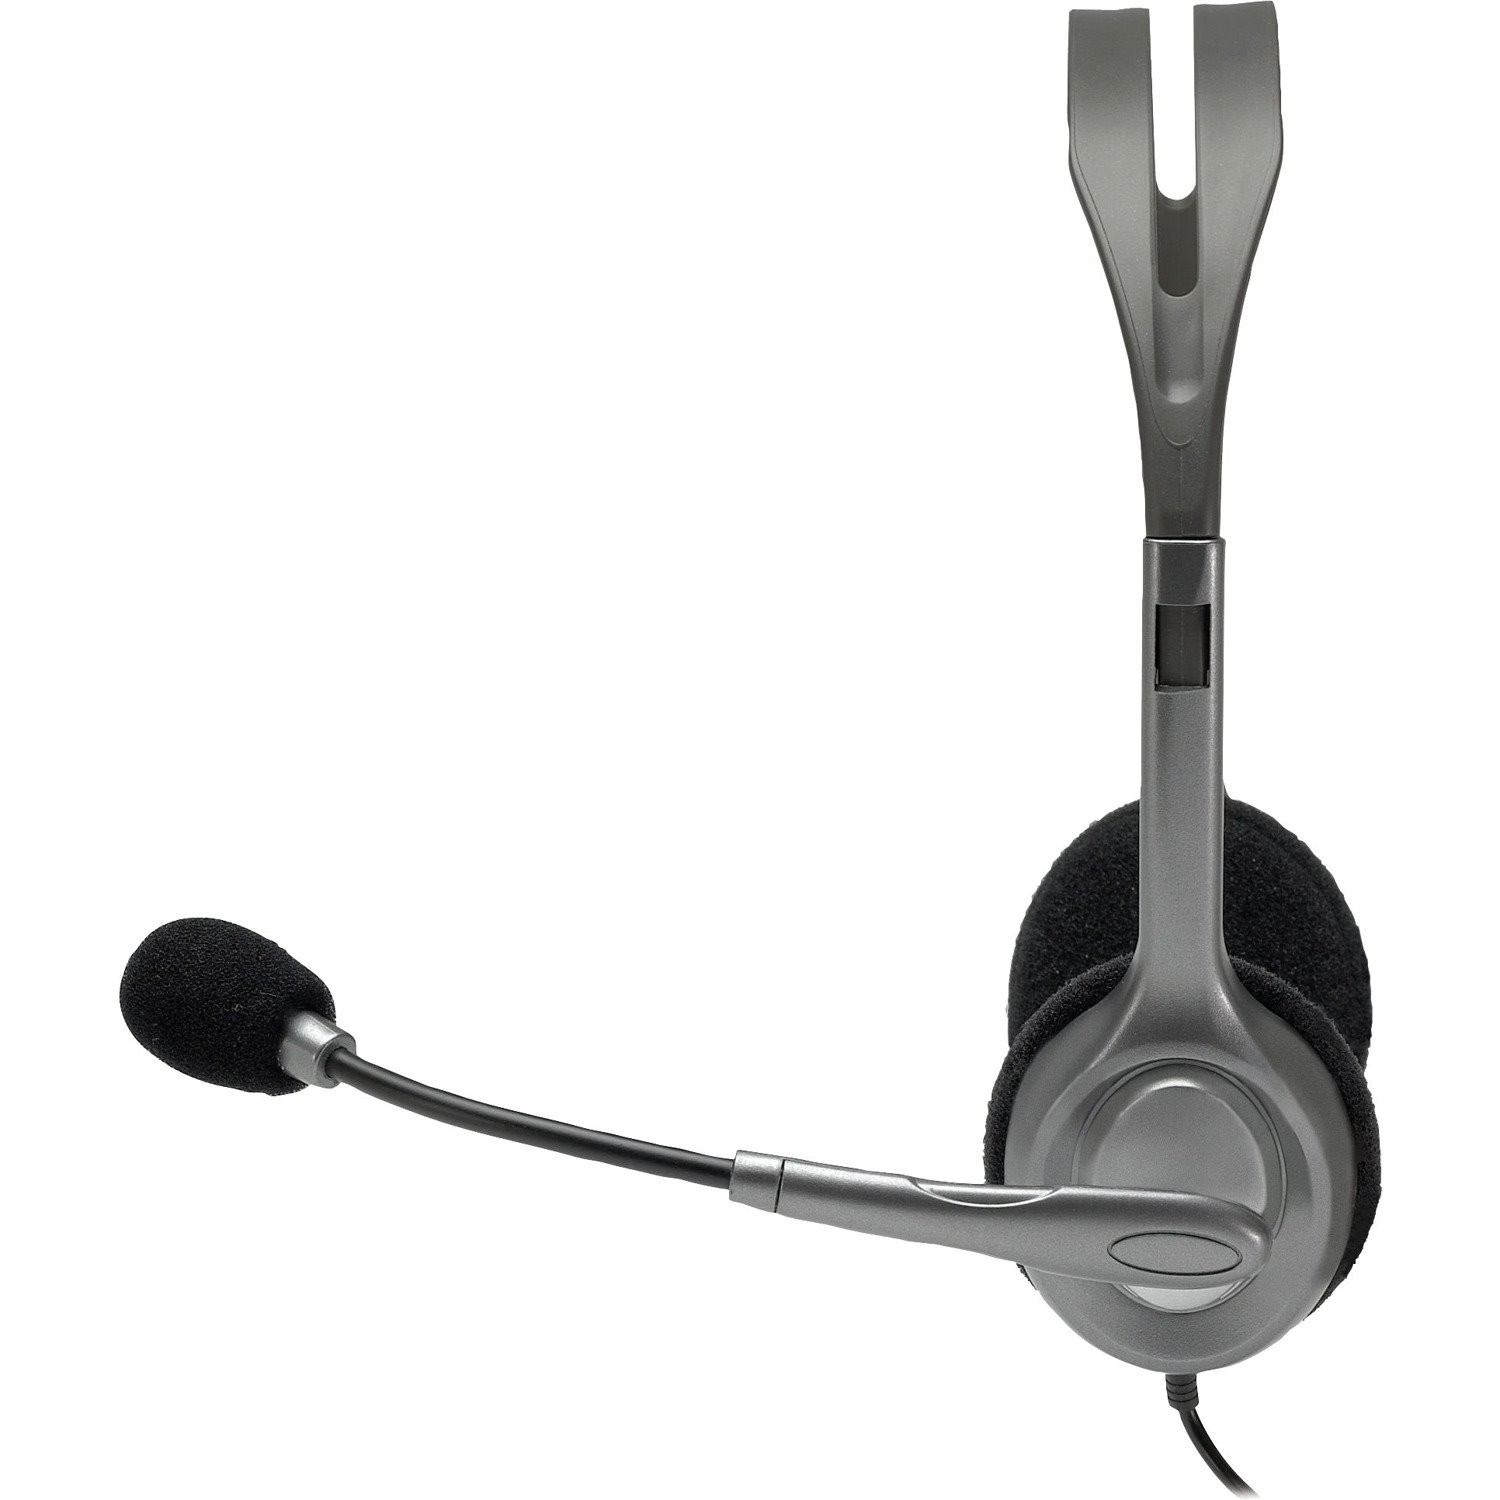 Logitech H111 Wired Over-the-head Stereo Headset - Black